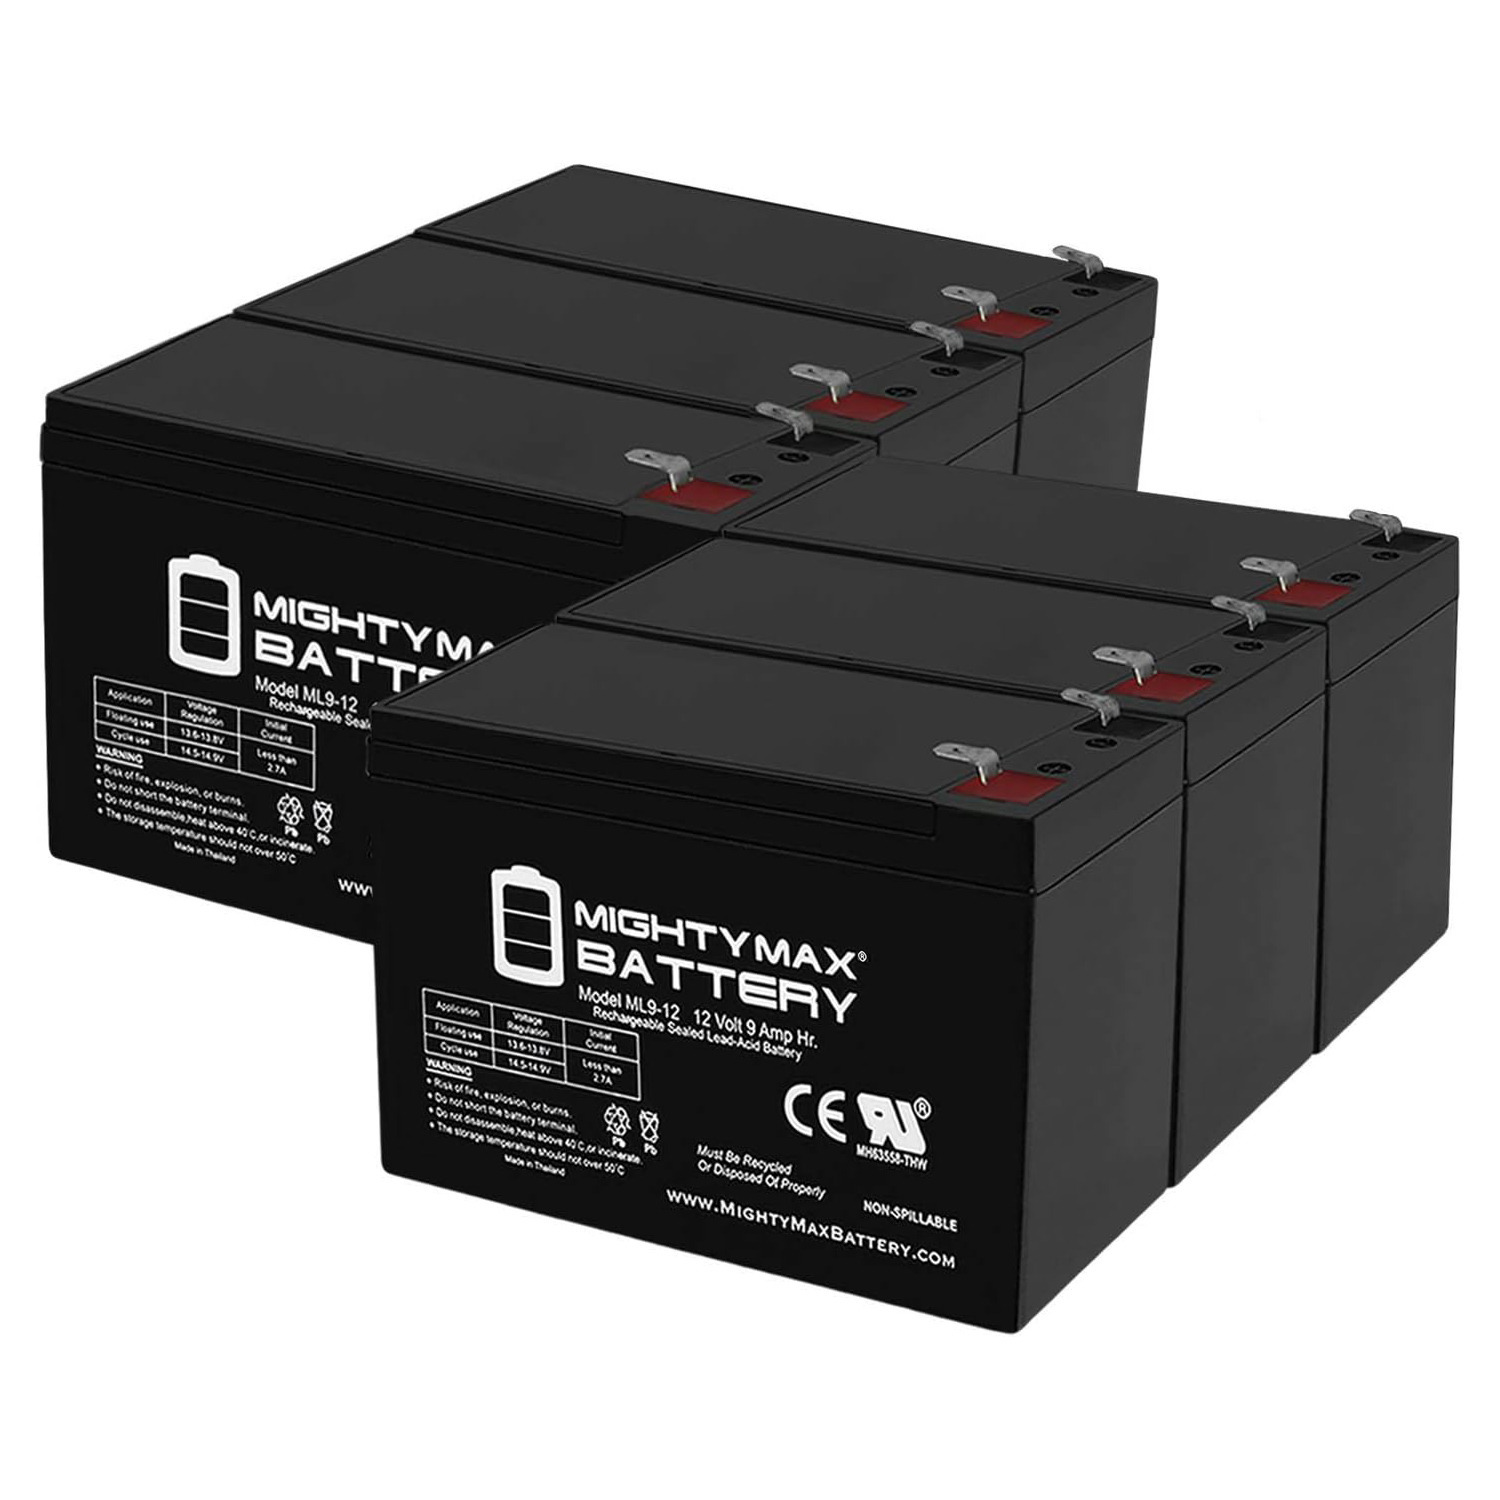 Altronix SMP5PMCTXPD4 12V, 9Ah Lead Acid Battery - 6 Pack